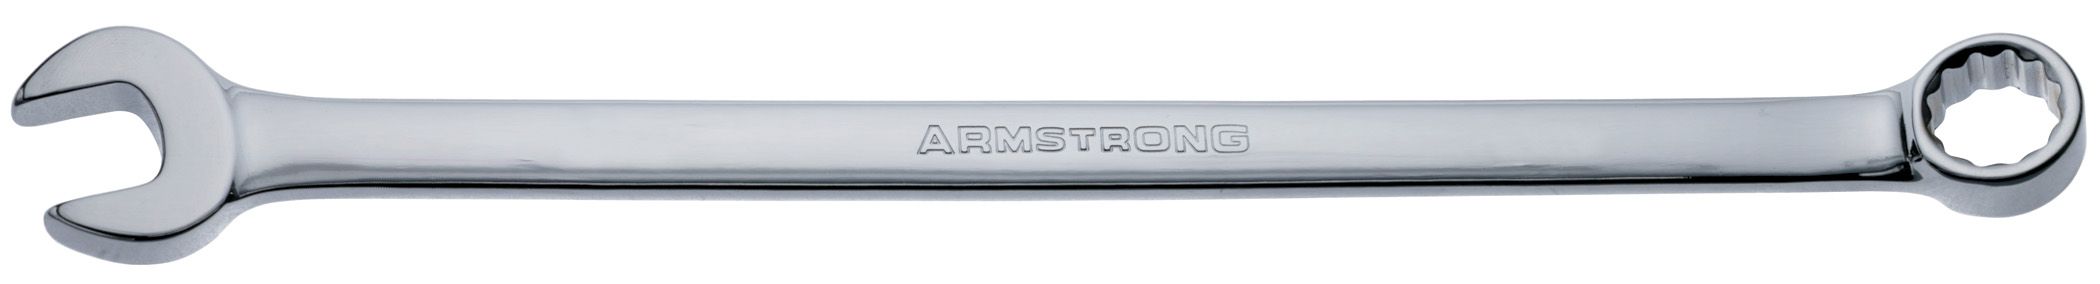 Armstrong 11 mm 12 pt. Full Polish Extra Long Combination Wrench